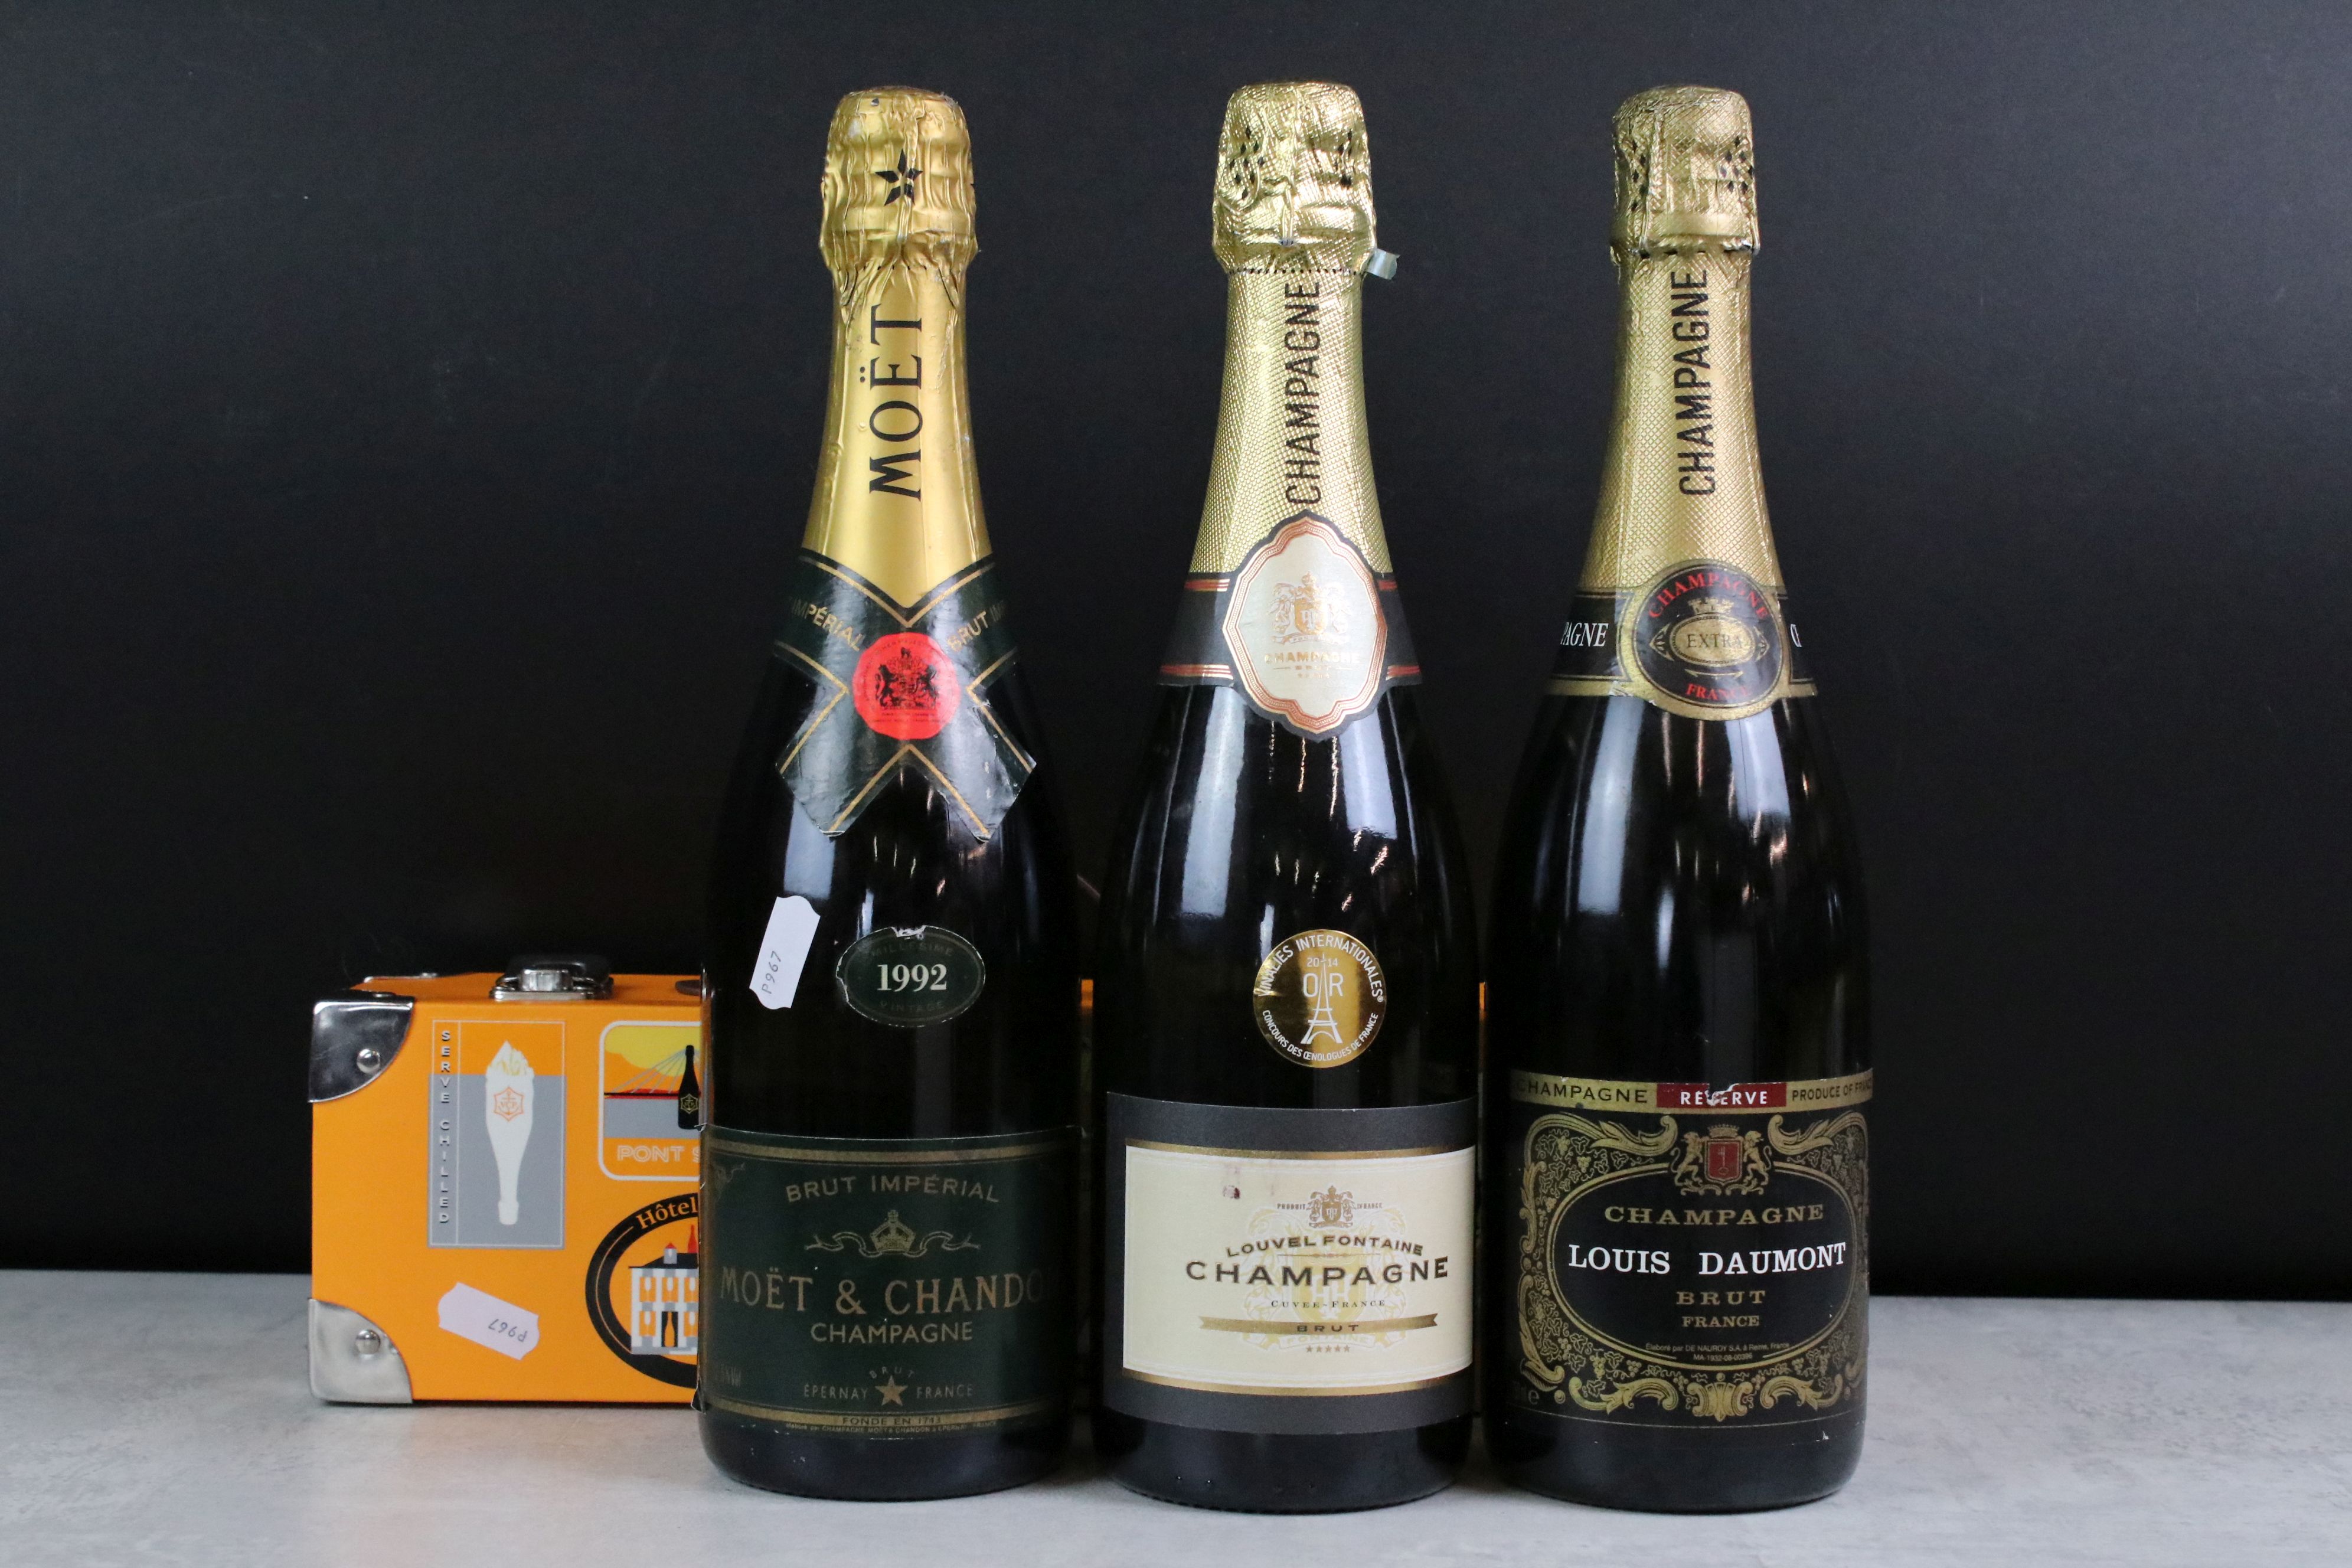 A collection of four bottles of Champagne to include Moet & Chandon, Louis Daumont, Louvel